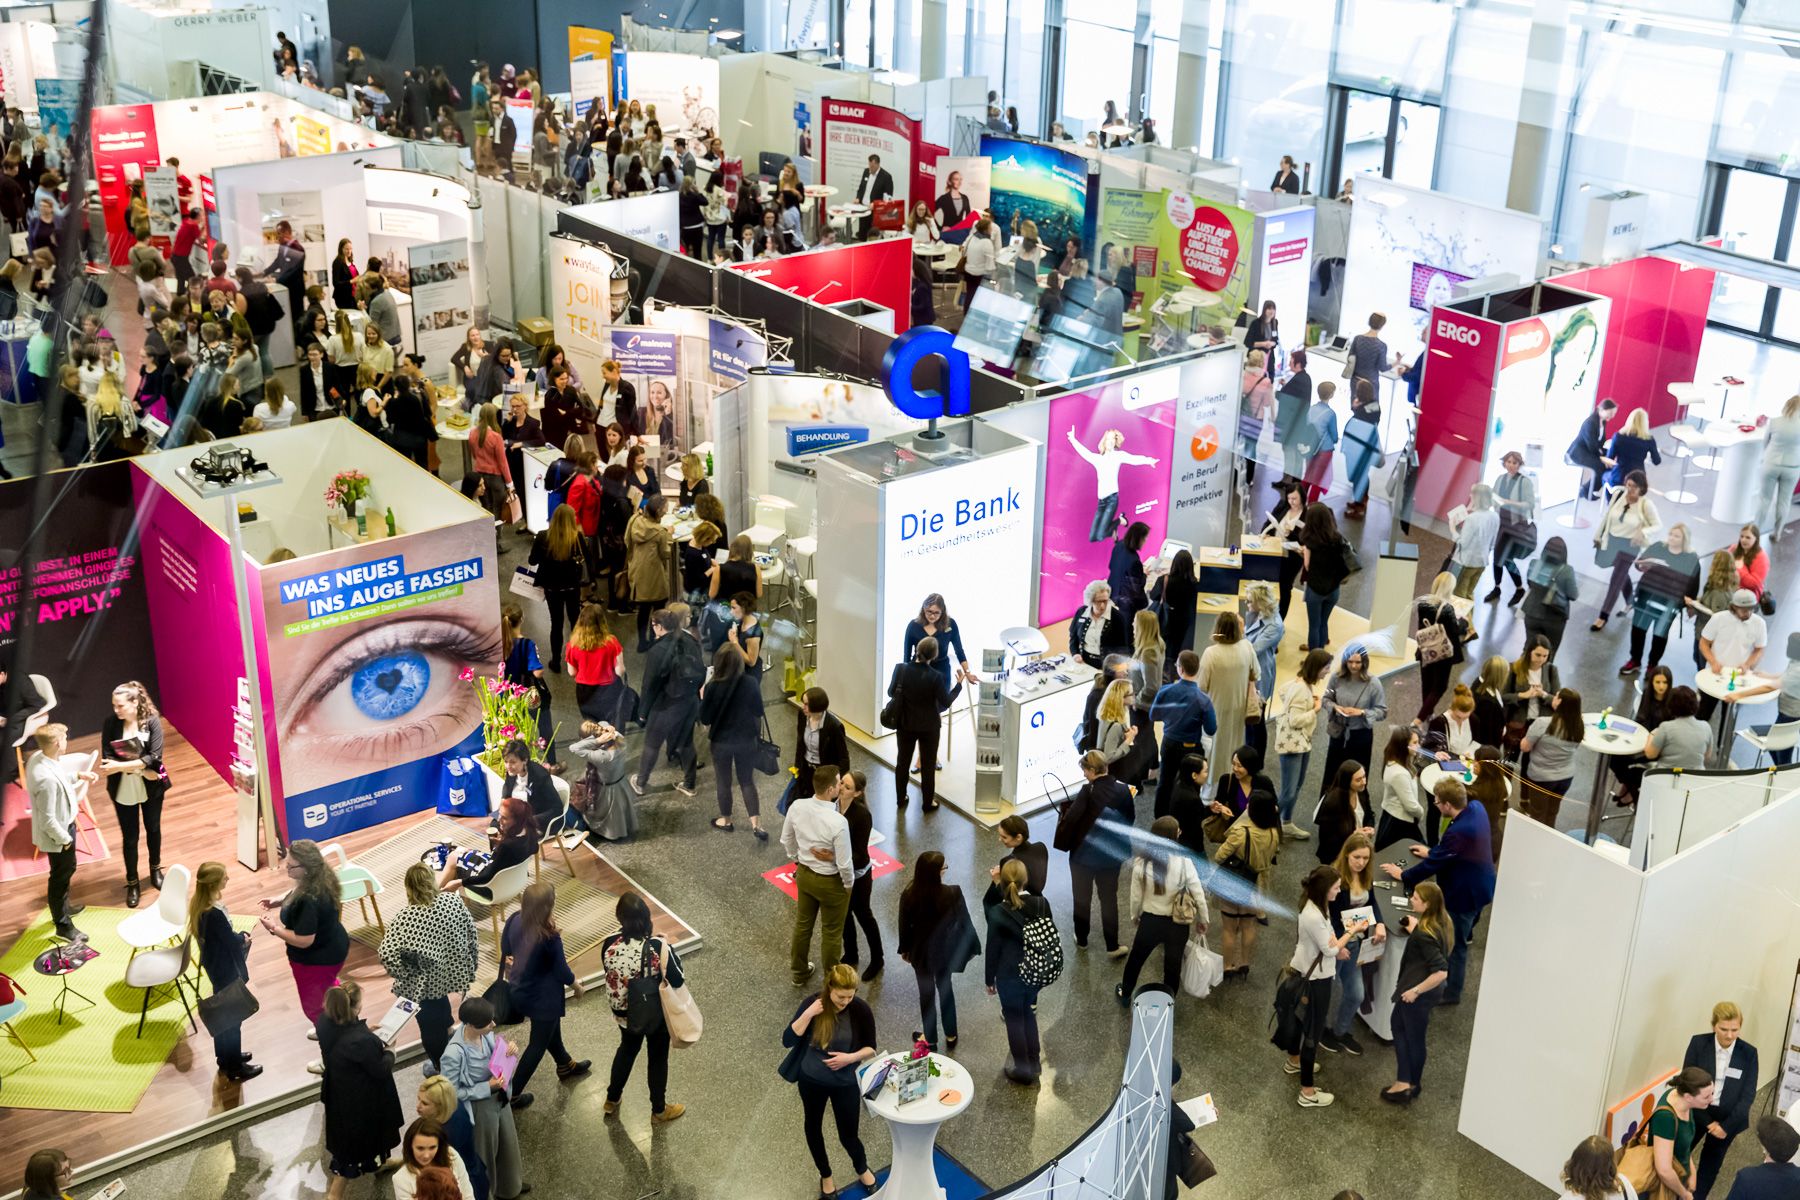 FRANKFURT, GERMANY - MAY 04, 2019: Europe's largest trade fair congress “woman&work” (Picture © 2019 Courtesy of woman&work)